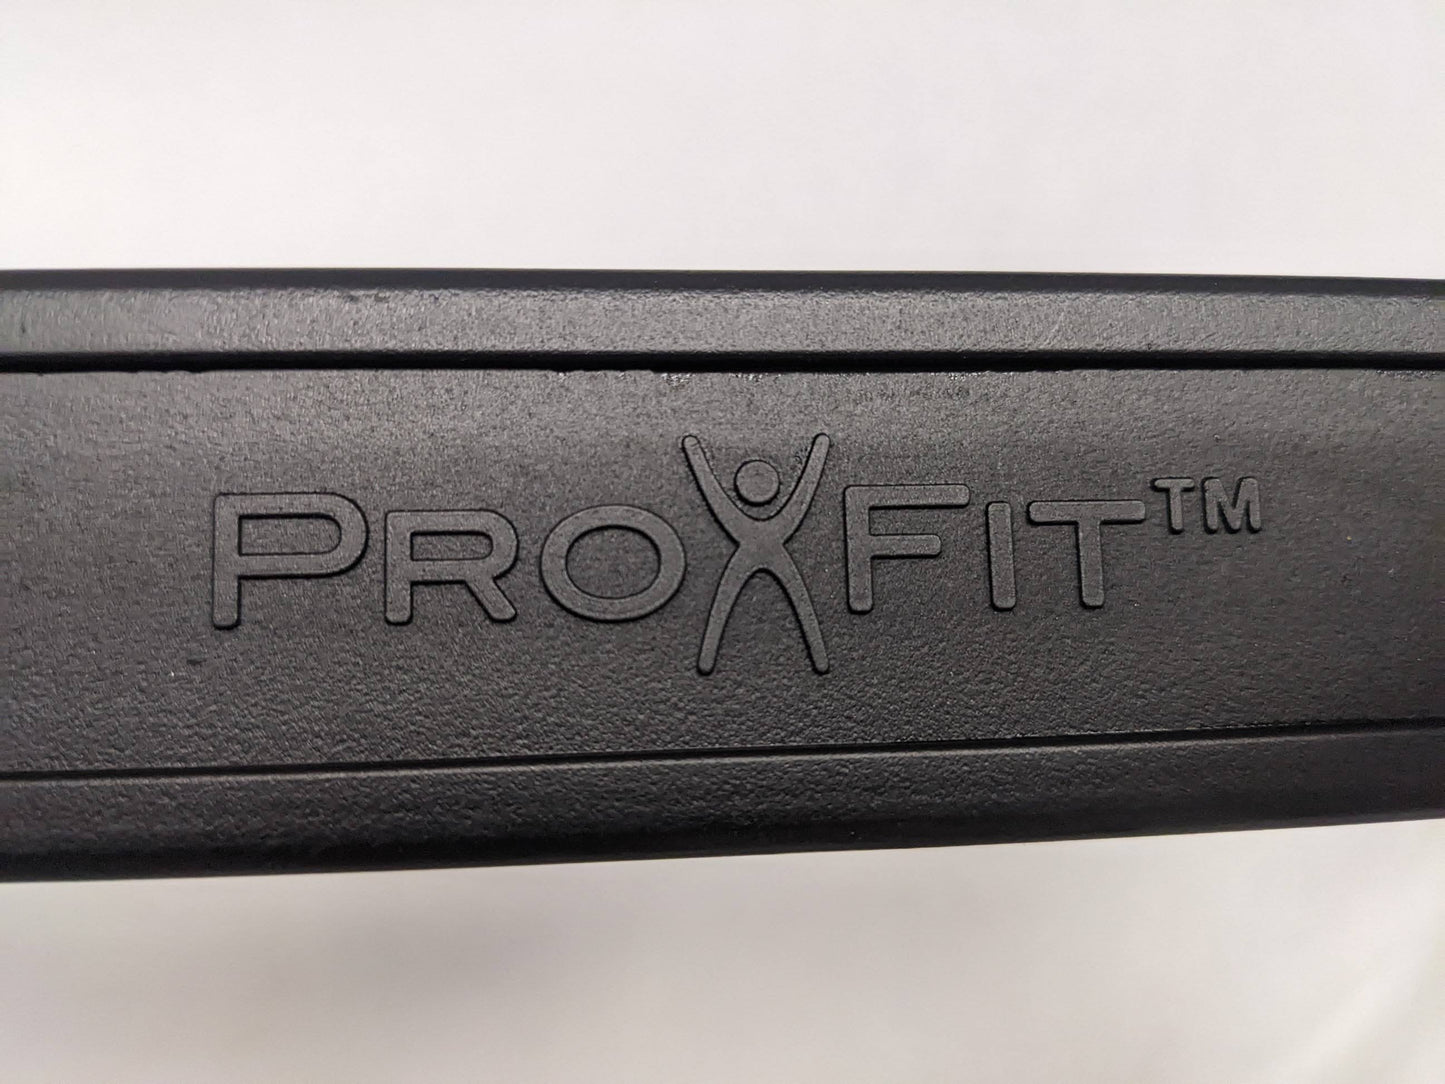 Iron Gym Pro Fit Over Door Pull Up Bar Size 36 In Color Black Condition Used